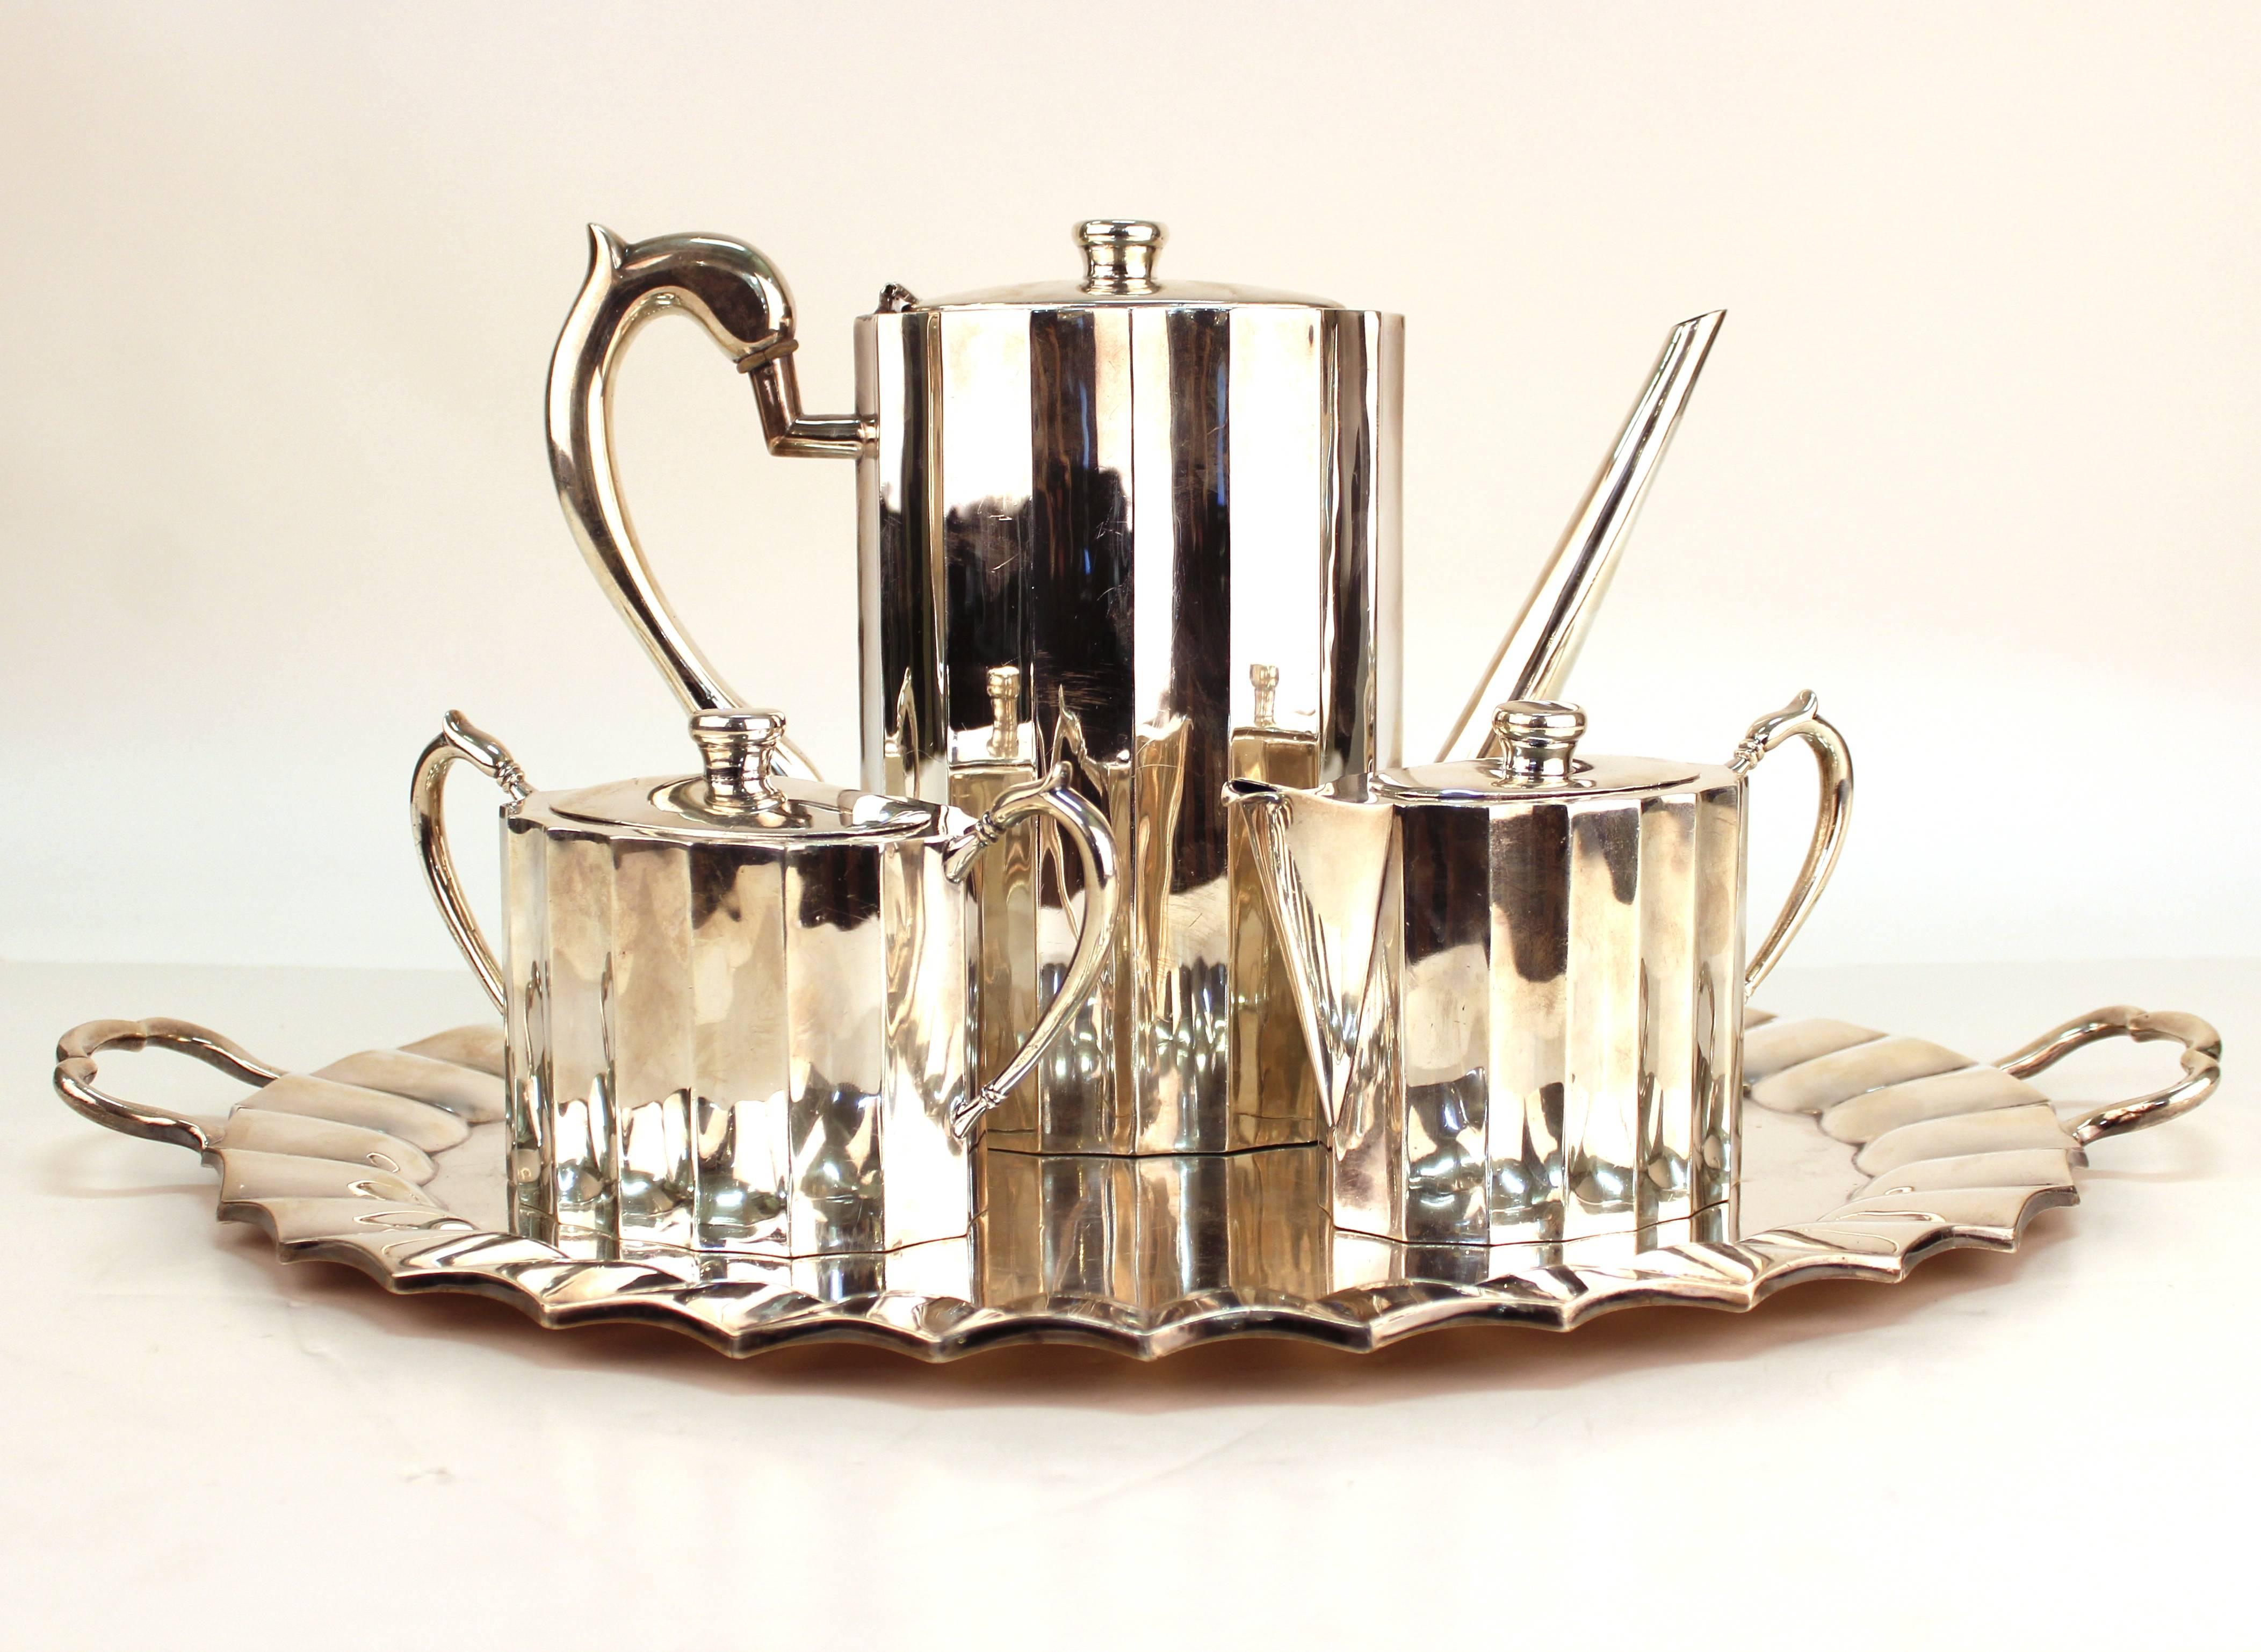 Coffee service set with tray in Mexican sterling silver. Includes four pieces including a coffee pot, creamer, sugar jar and tray. Signed J. Rivaso. Tarnish and scrapes to surface with unhinged lid on the coffee pot. Minor dents throughout. The set